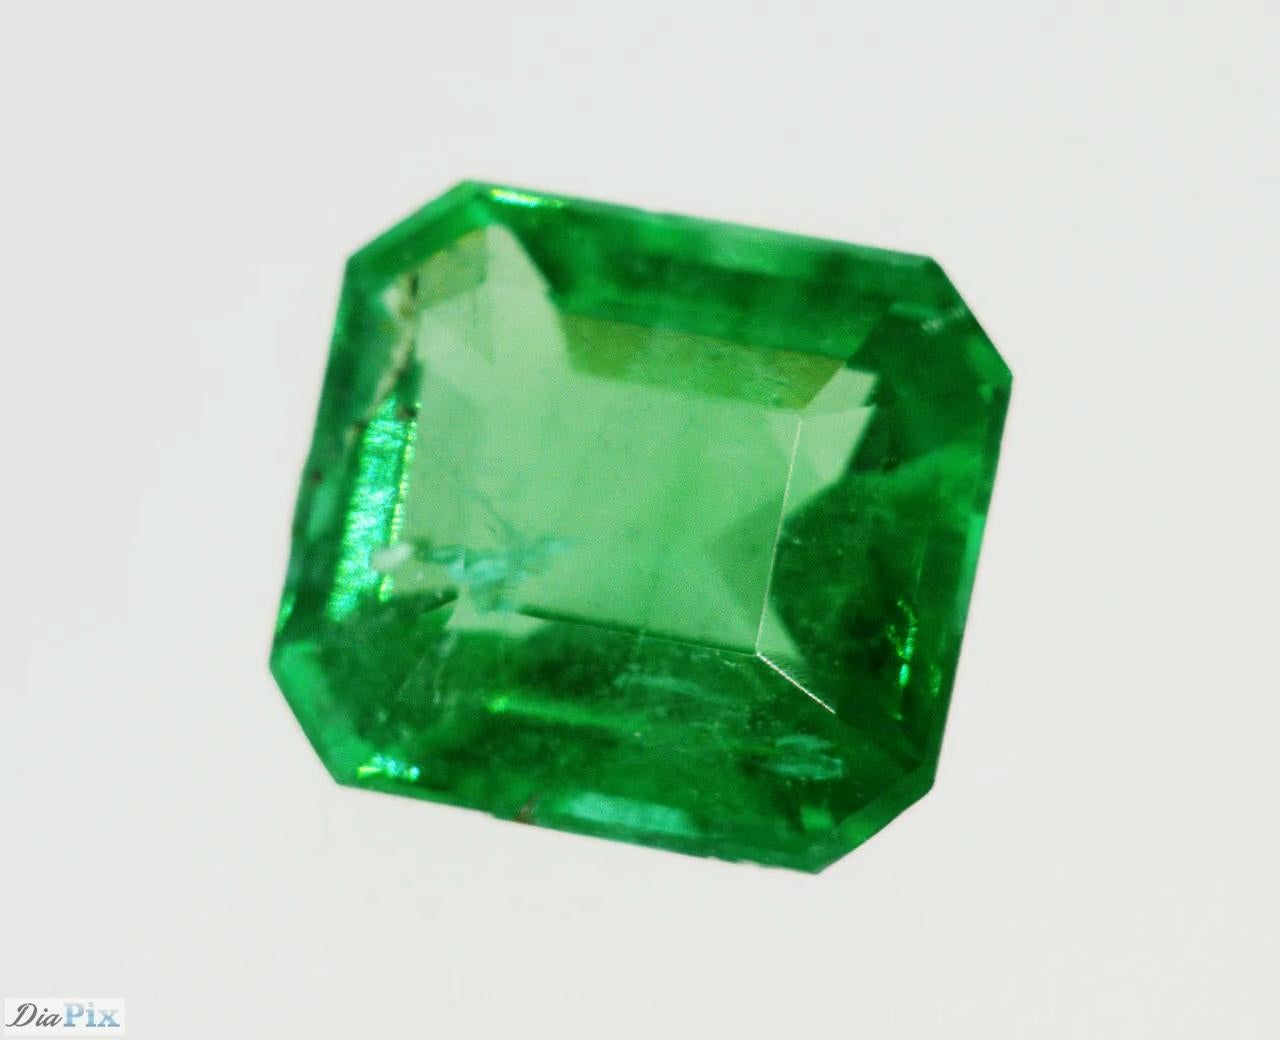 Emeralds are naturally porous and inclusive stones, with surface reaching fractures and in order to improve its clarity, it is a common and widely accepted practice in the industry to fill those fractures with oil or resin. Those materials are